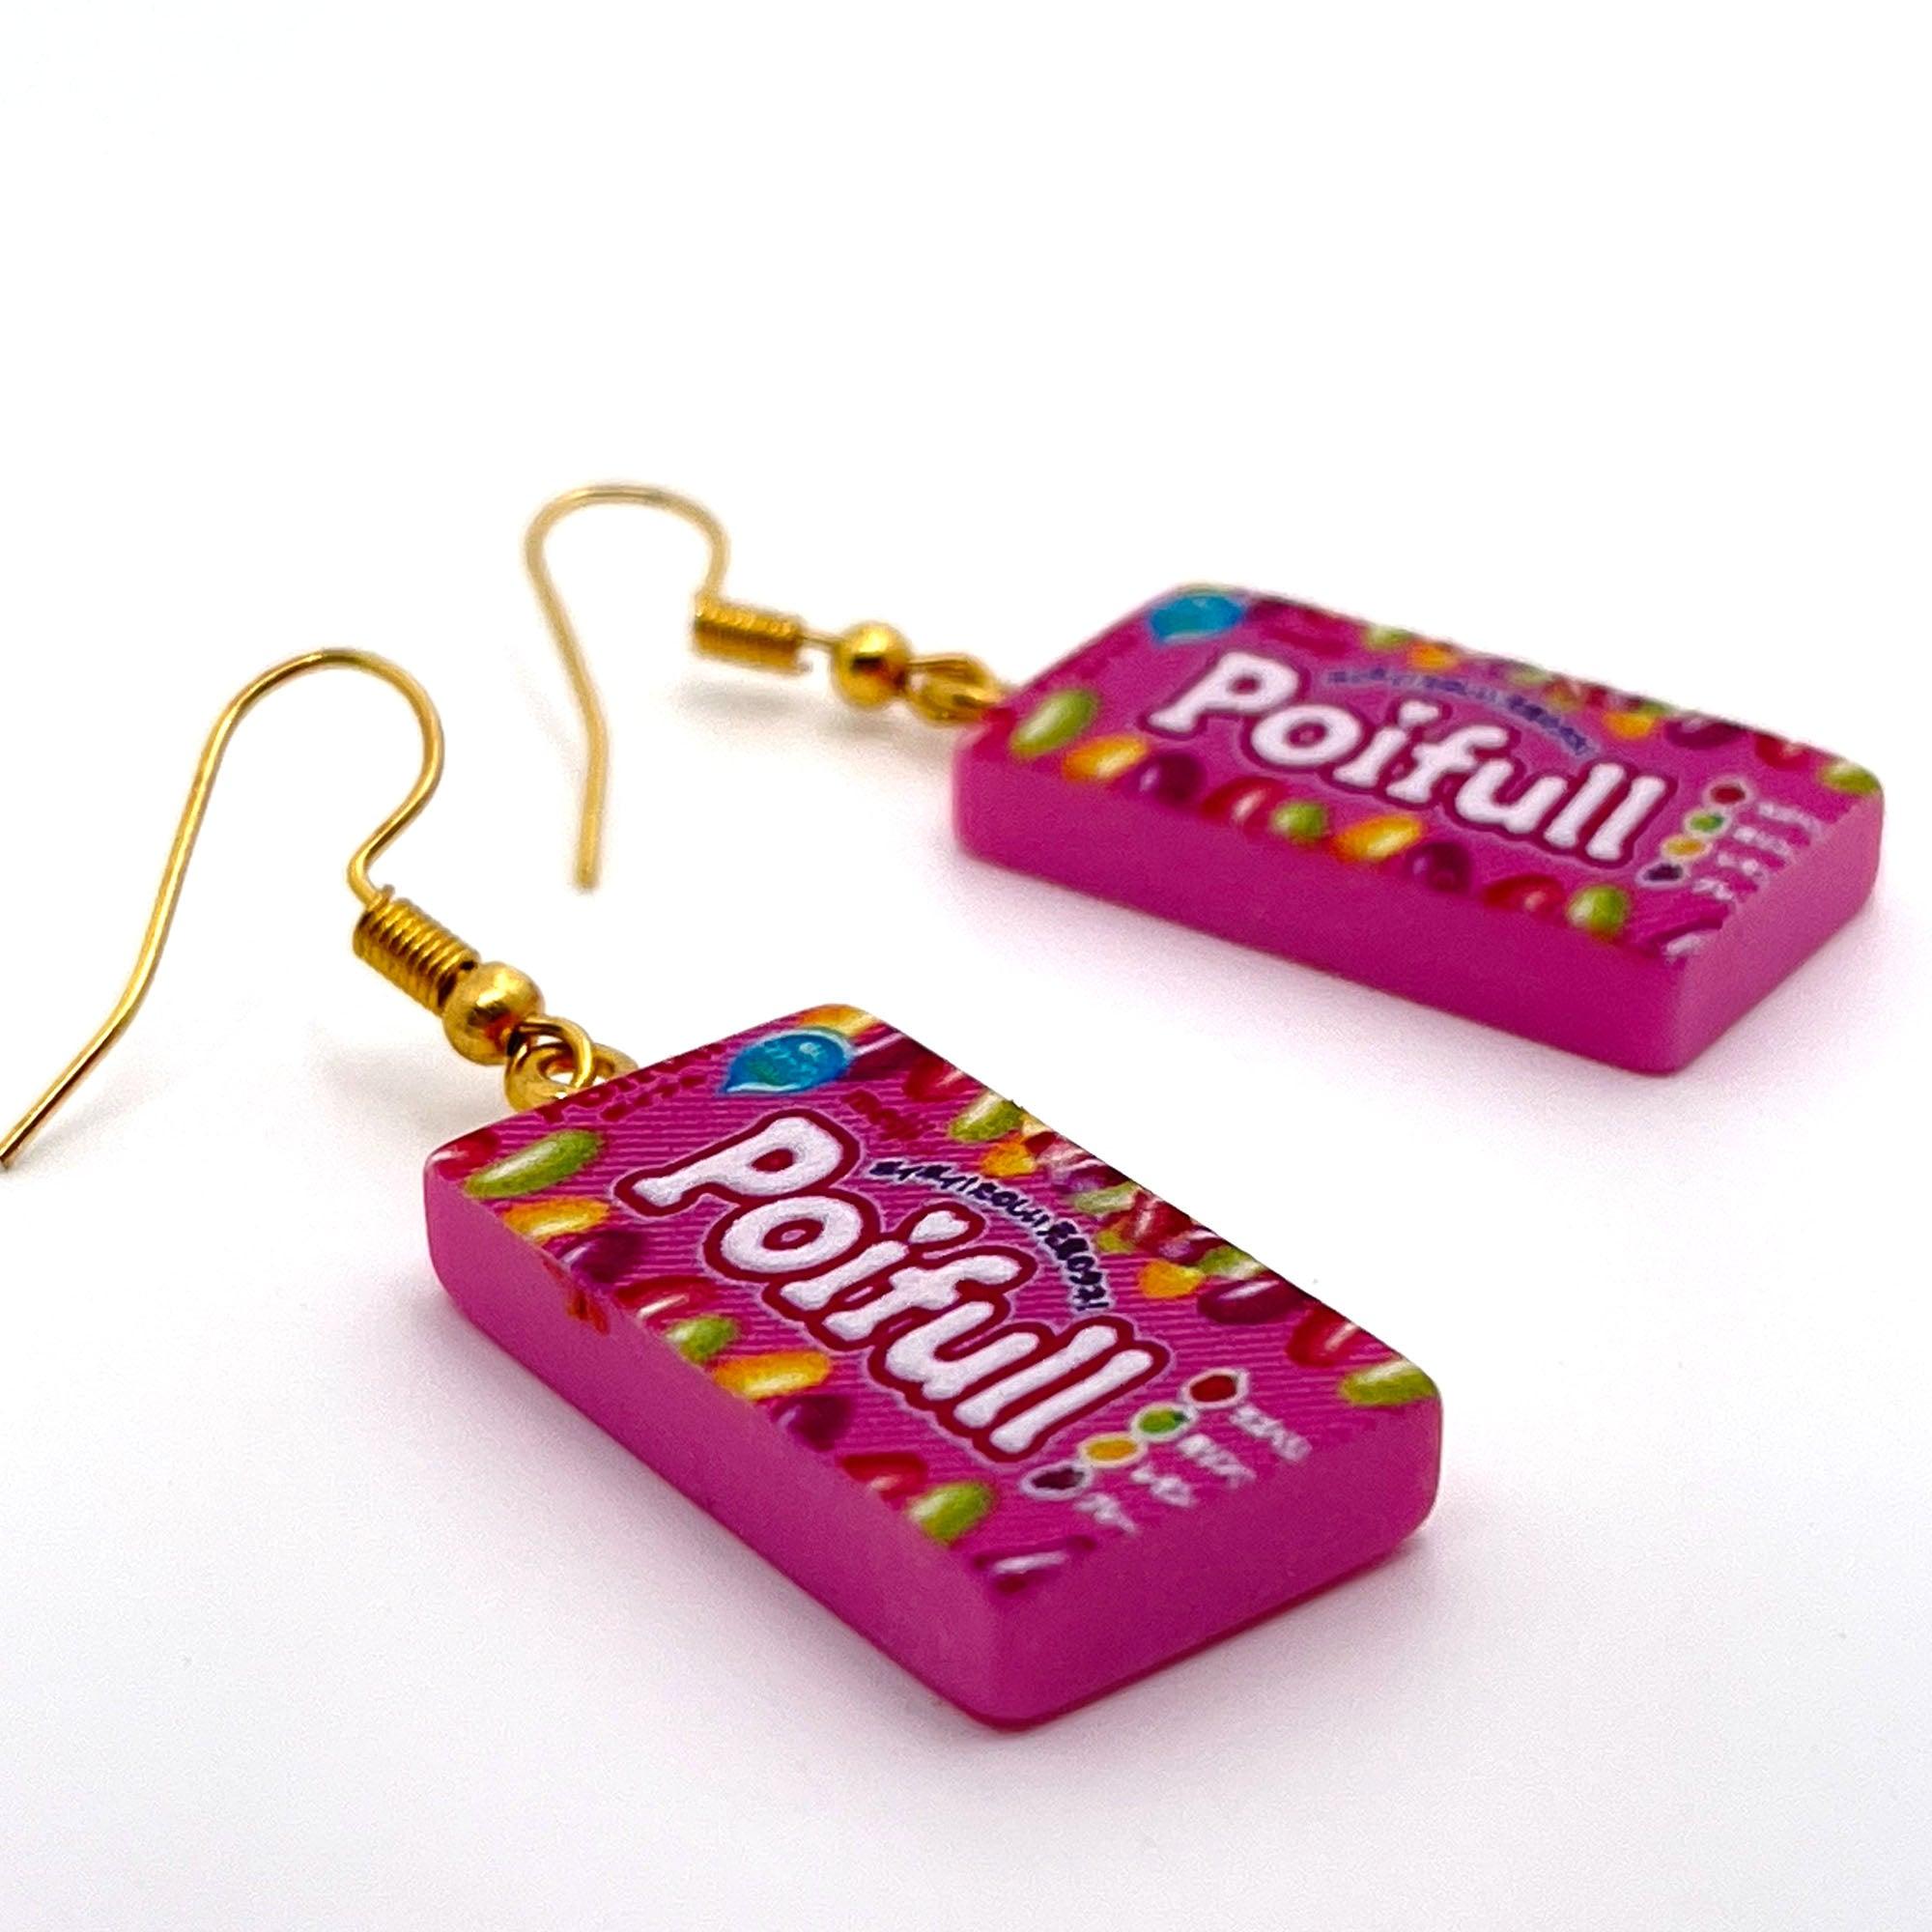 Japanese Candy Jellybean  Resin Earrings - No System